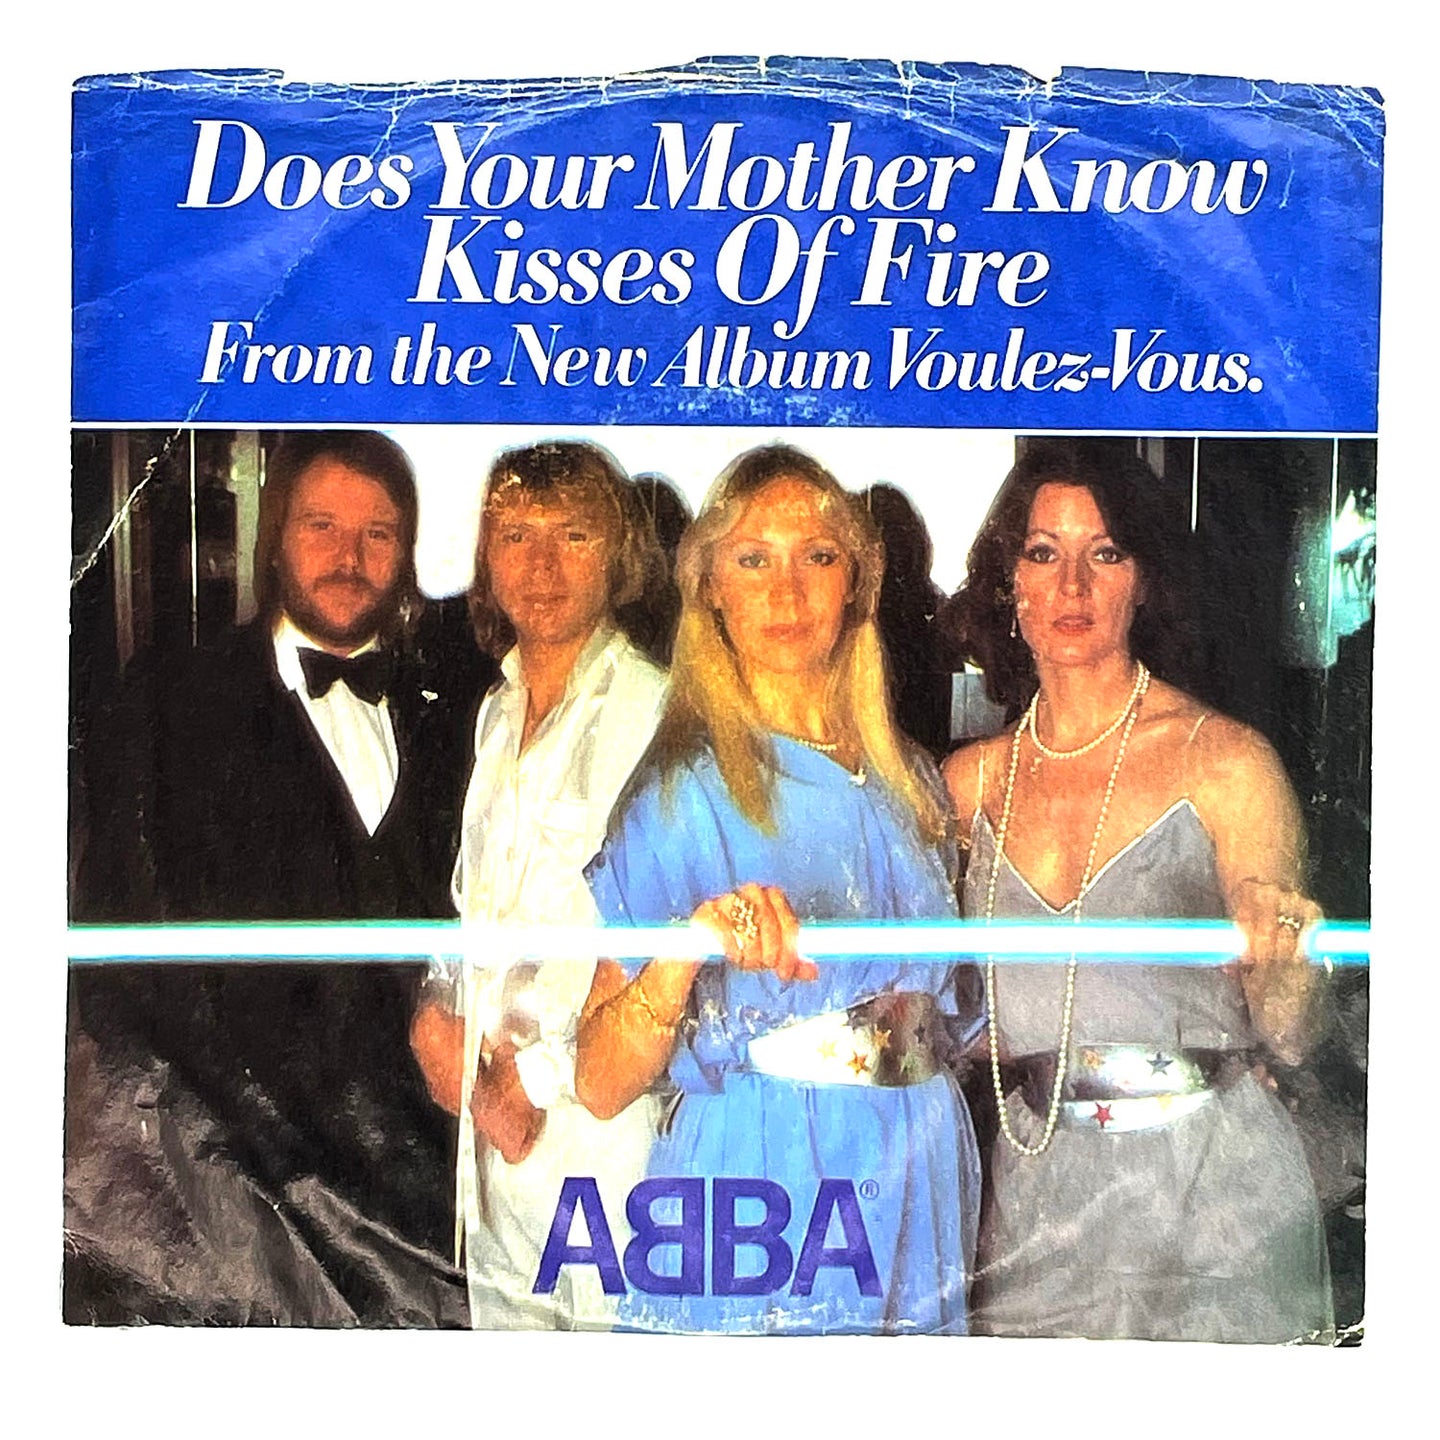 ABBA : DOES YOUR MOTHER KNOW/ KISSES OF FIRE